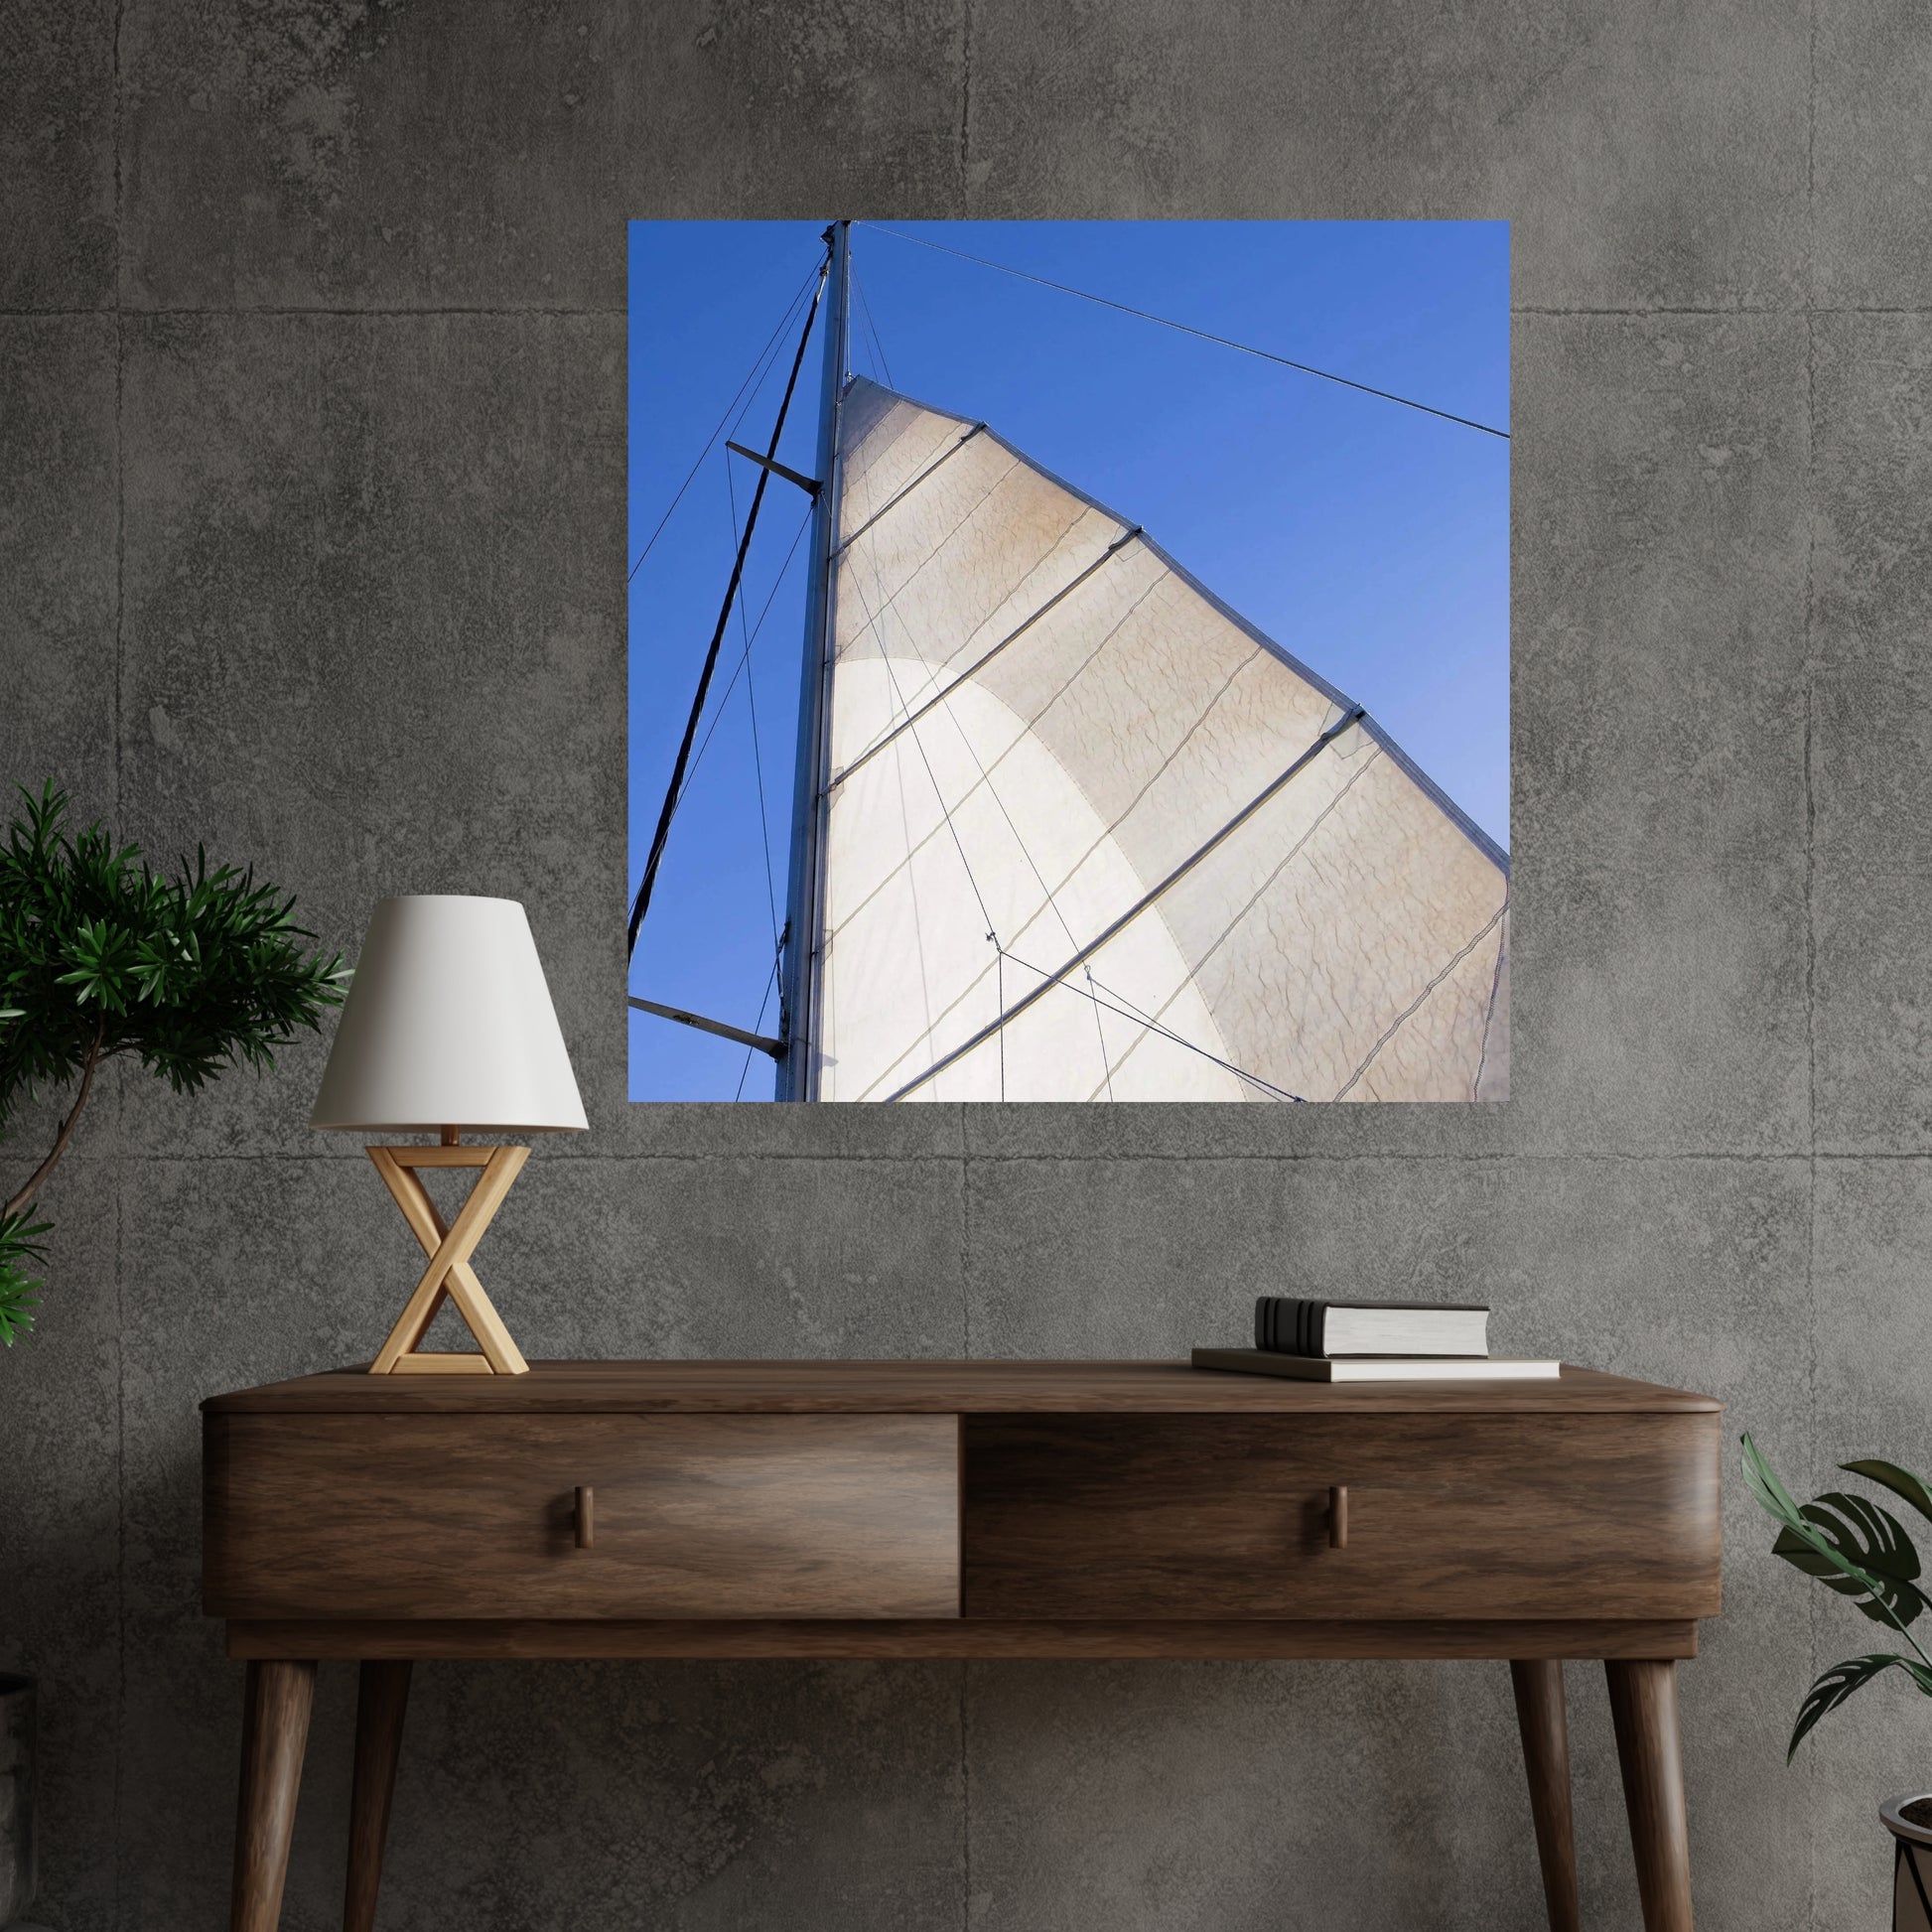 large acrylic art of a sailboat mast looking upward and hanging on a dark concrete wall above a brown entryway table